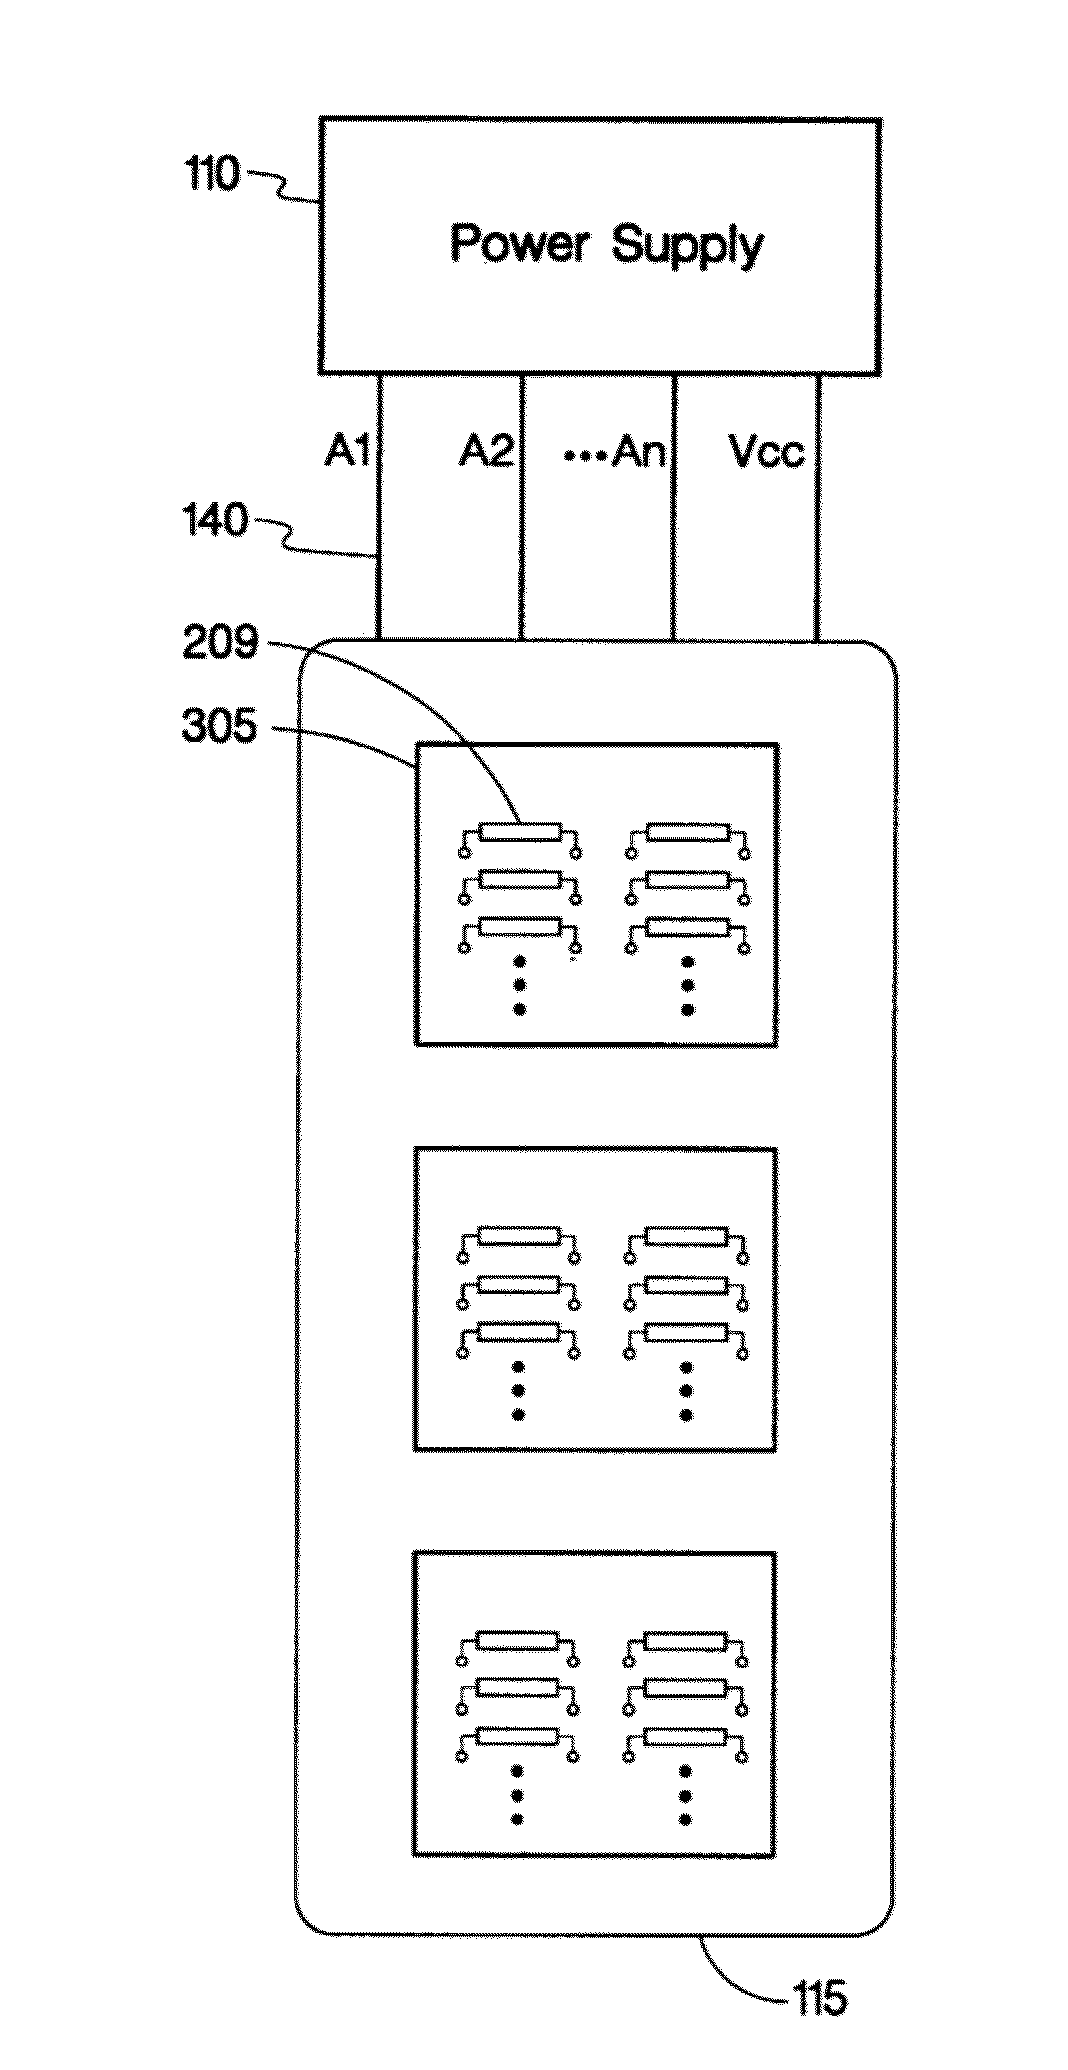 System for enabling multiple clock speeds and I/O configurations in an inkjet printing device